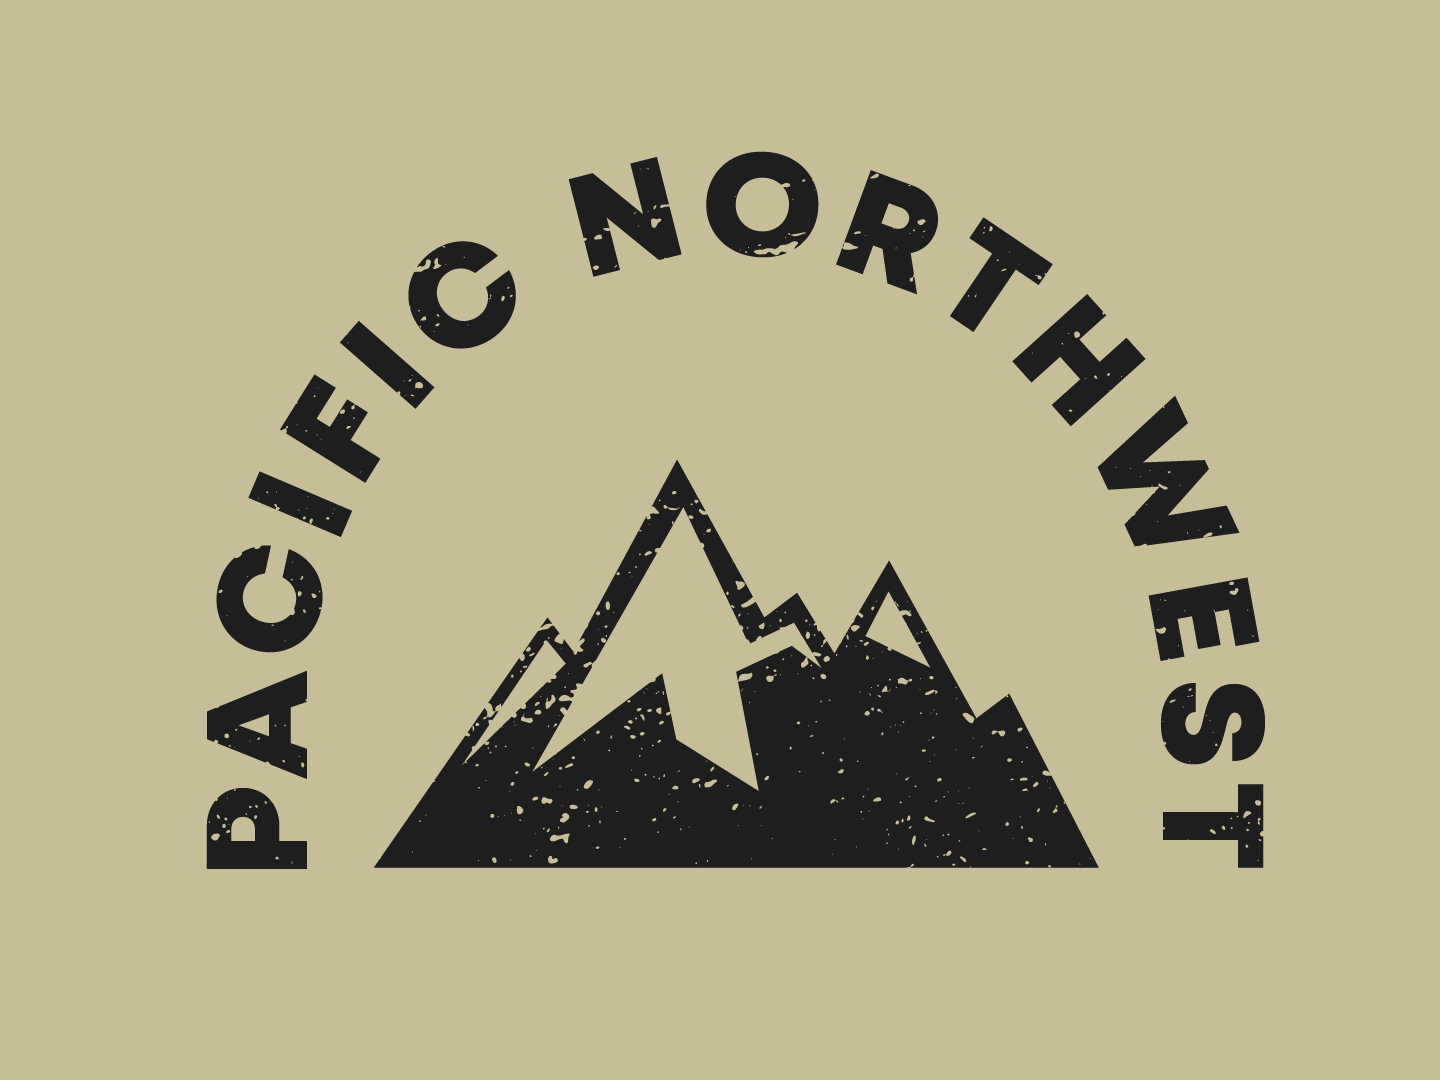 PNW Logo - Pacific Northwest Mountain logo by Yannis Choglo on Dribbble